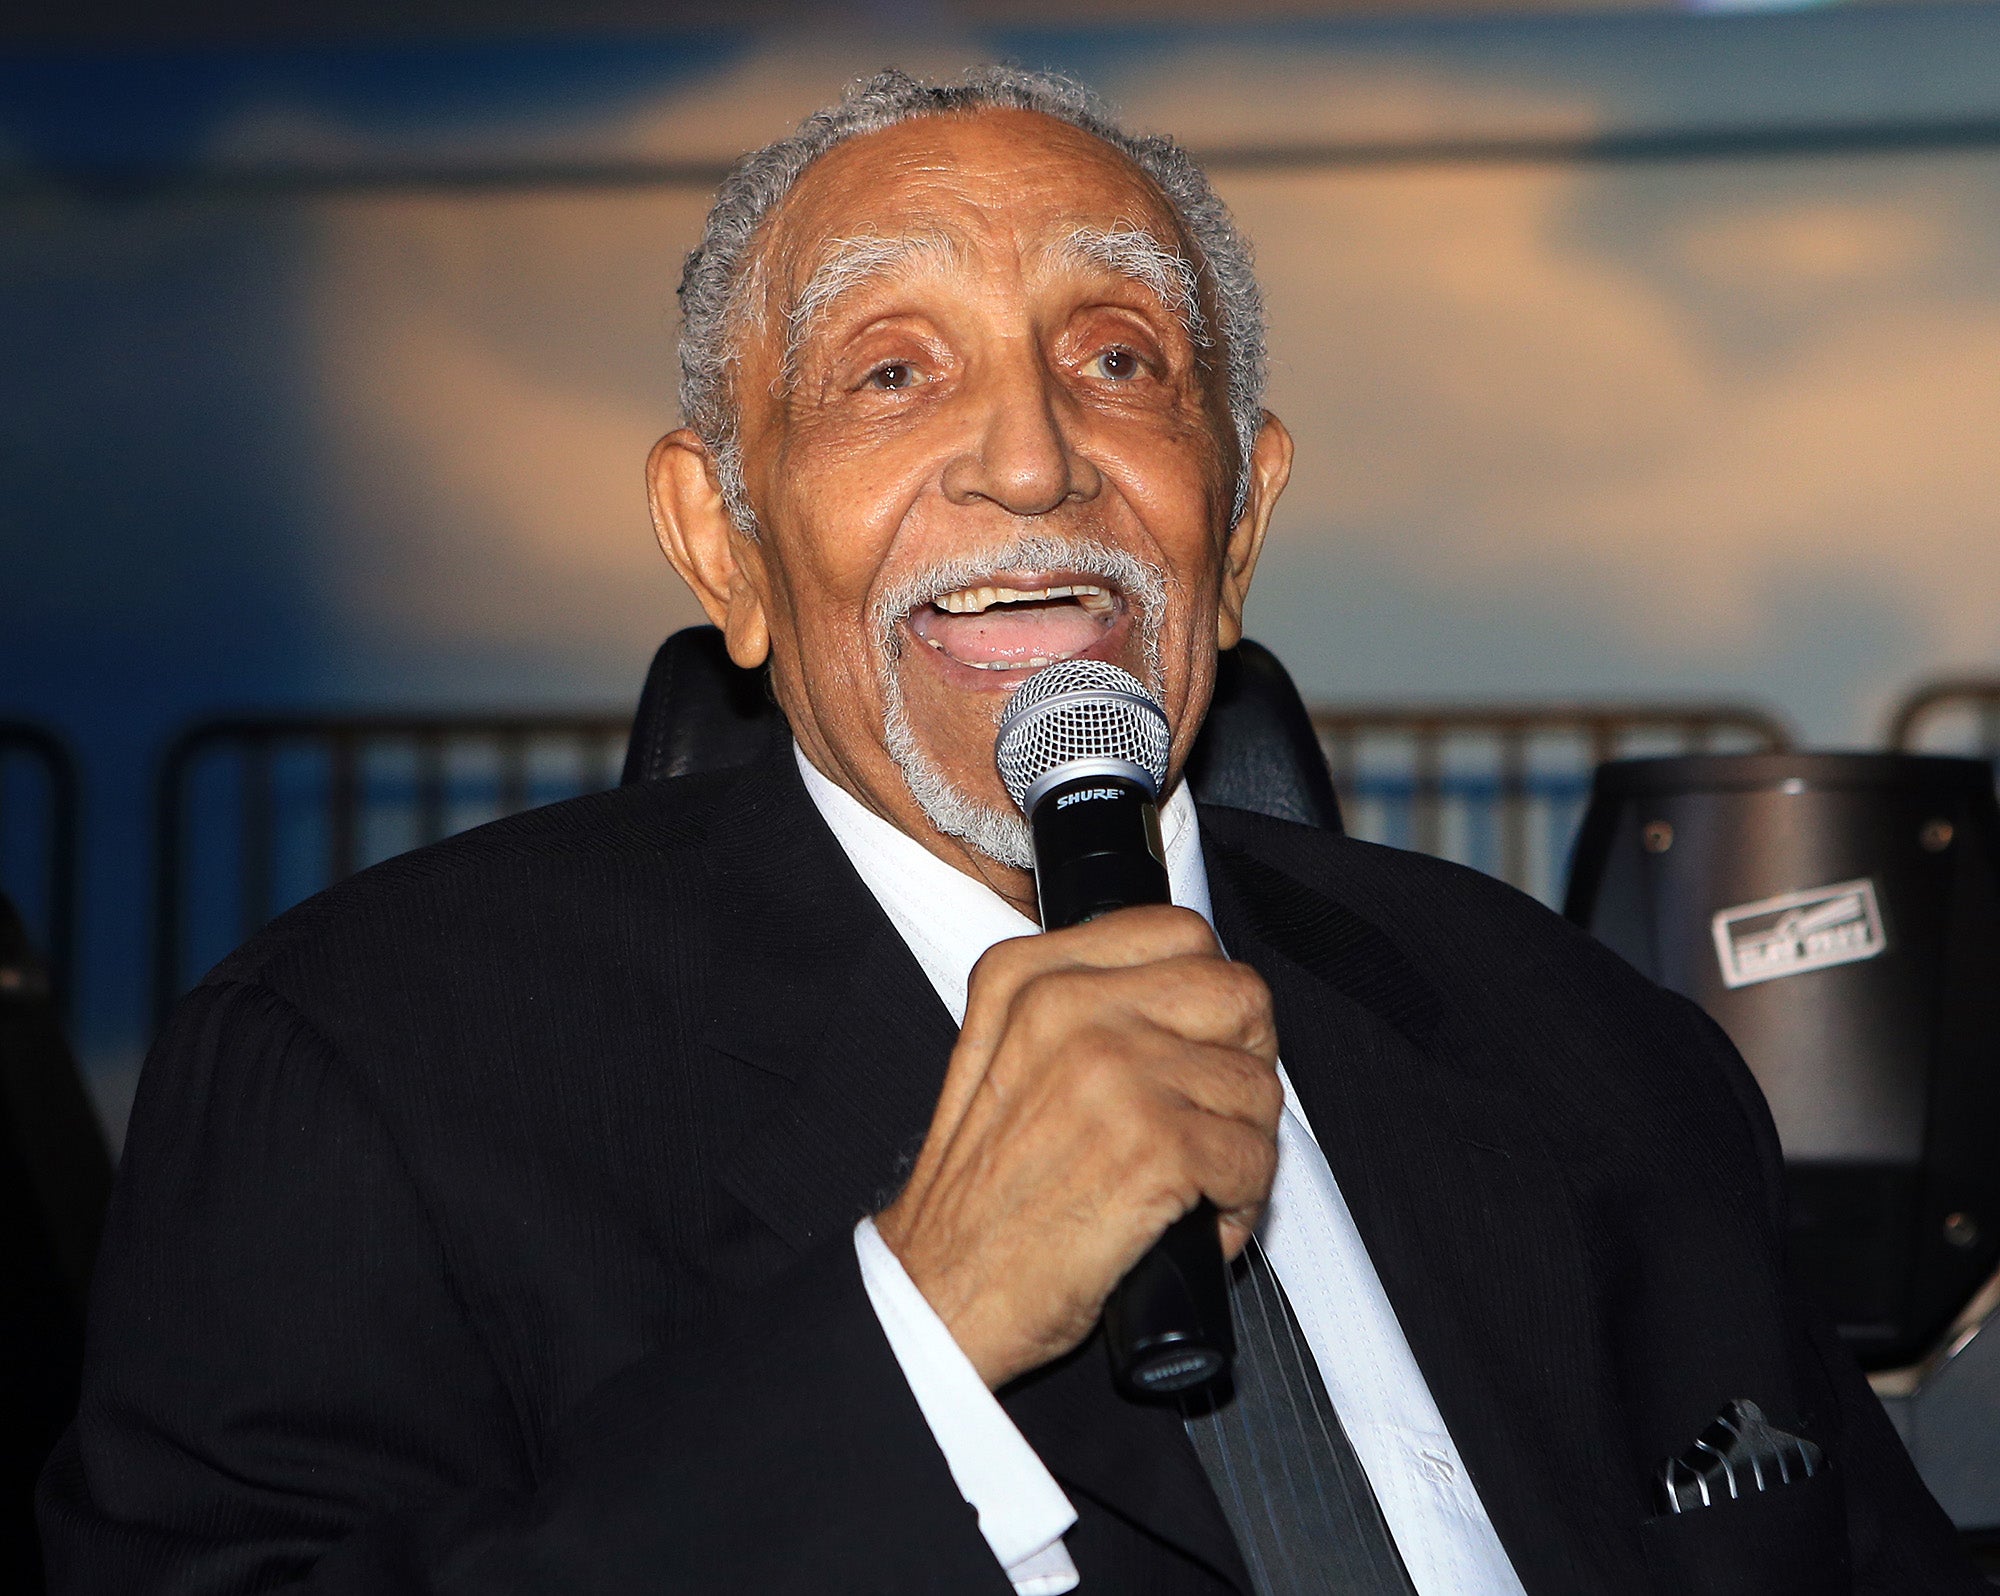 The Rev. Dr. Joseph E. Lowery laughs with the audience while speaking at the end of his 94th birthday celebration